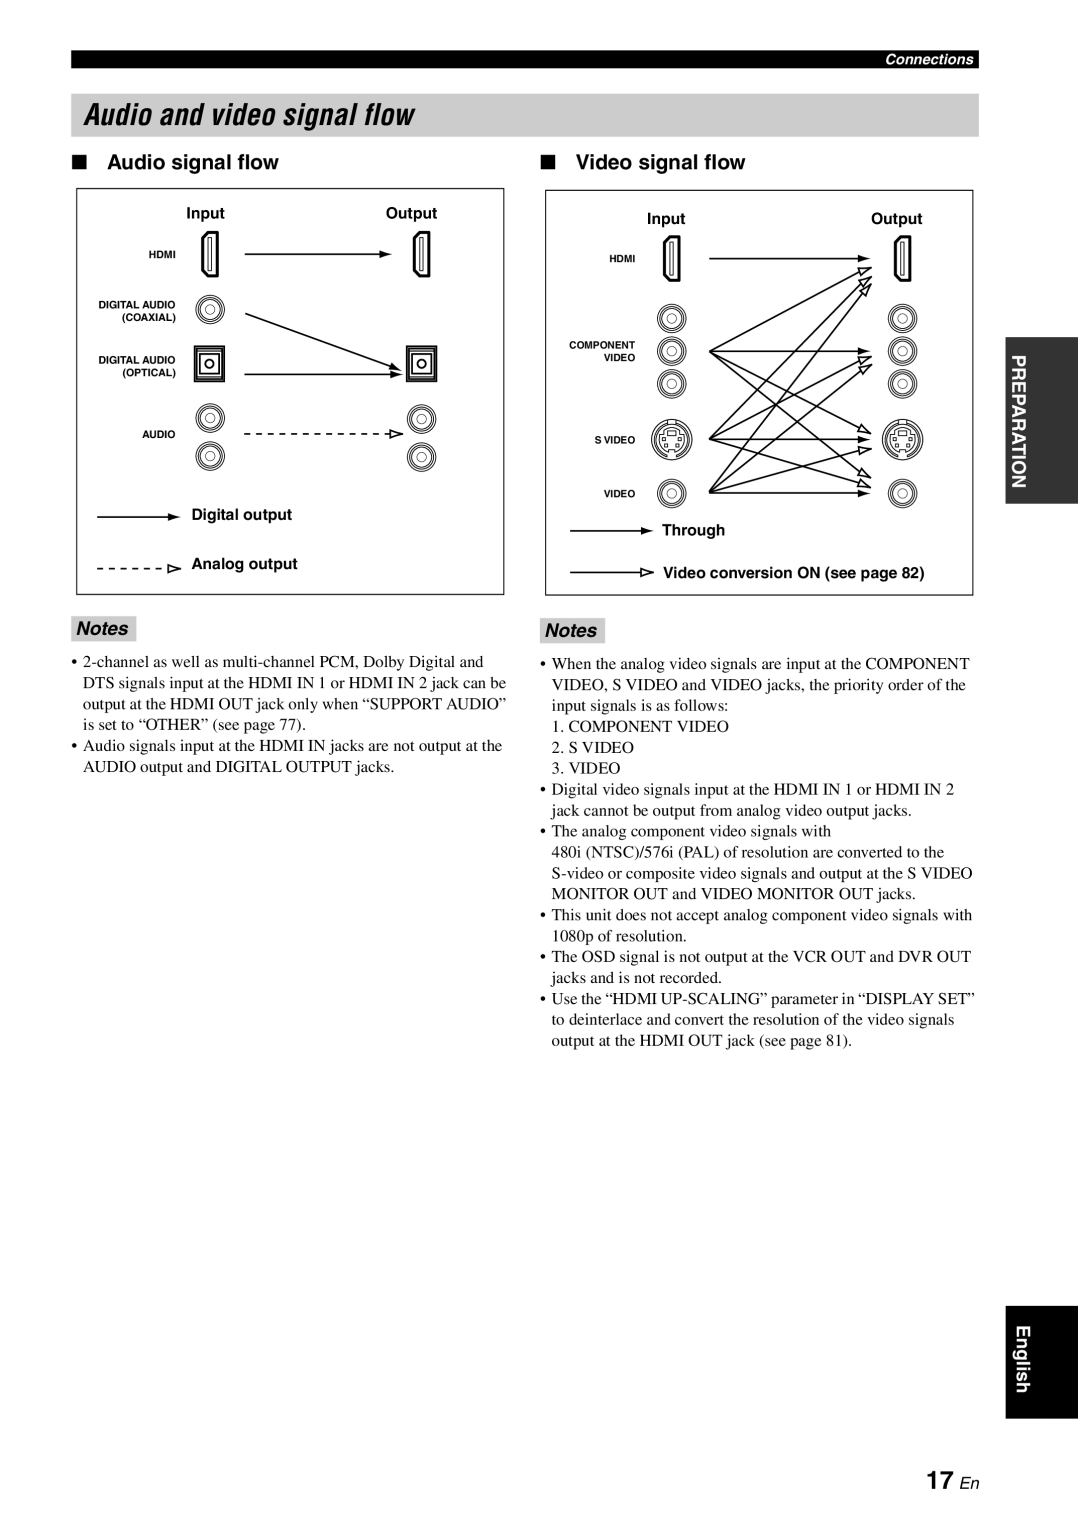 Yamaha HTR-6080 owner manual Audio and video signal flow, 17 En, Audio signal flow, Video signal flow, Notes 